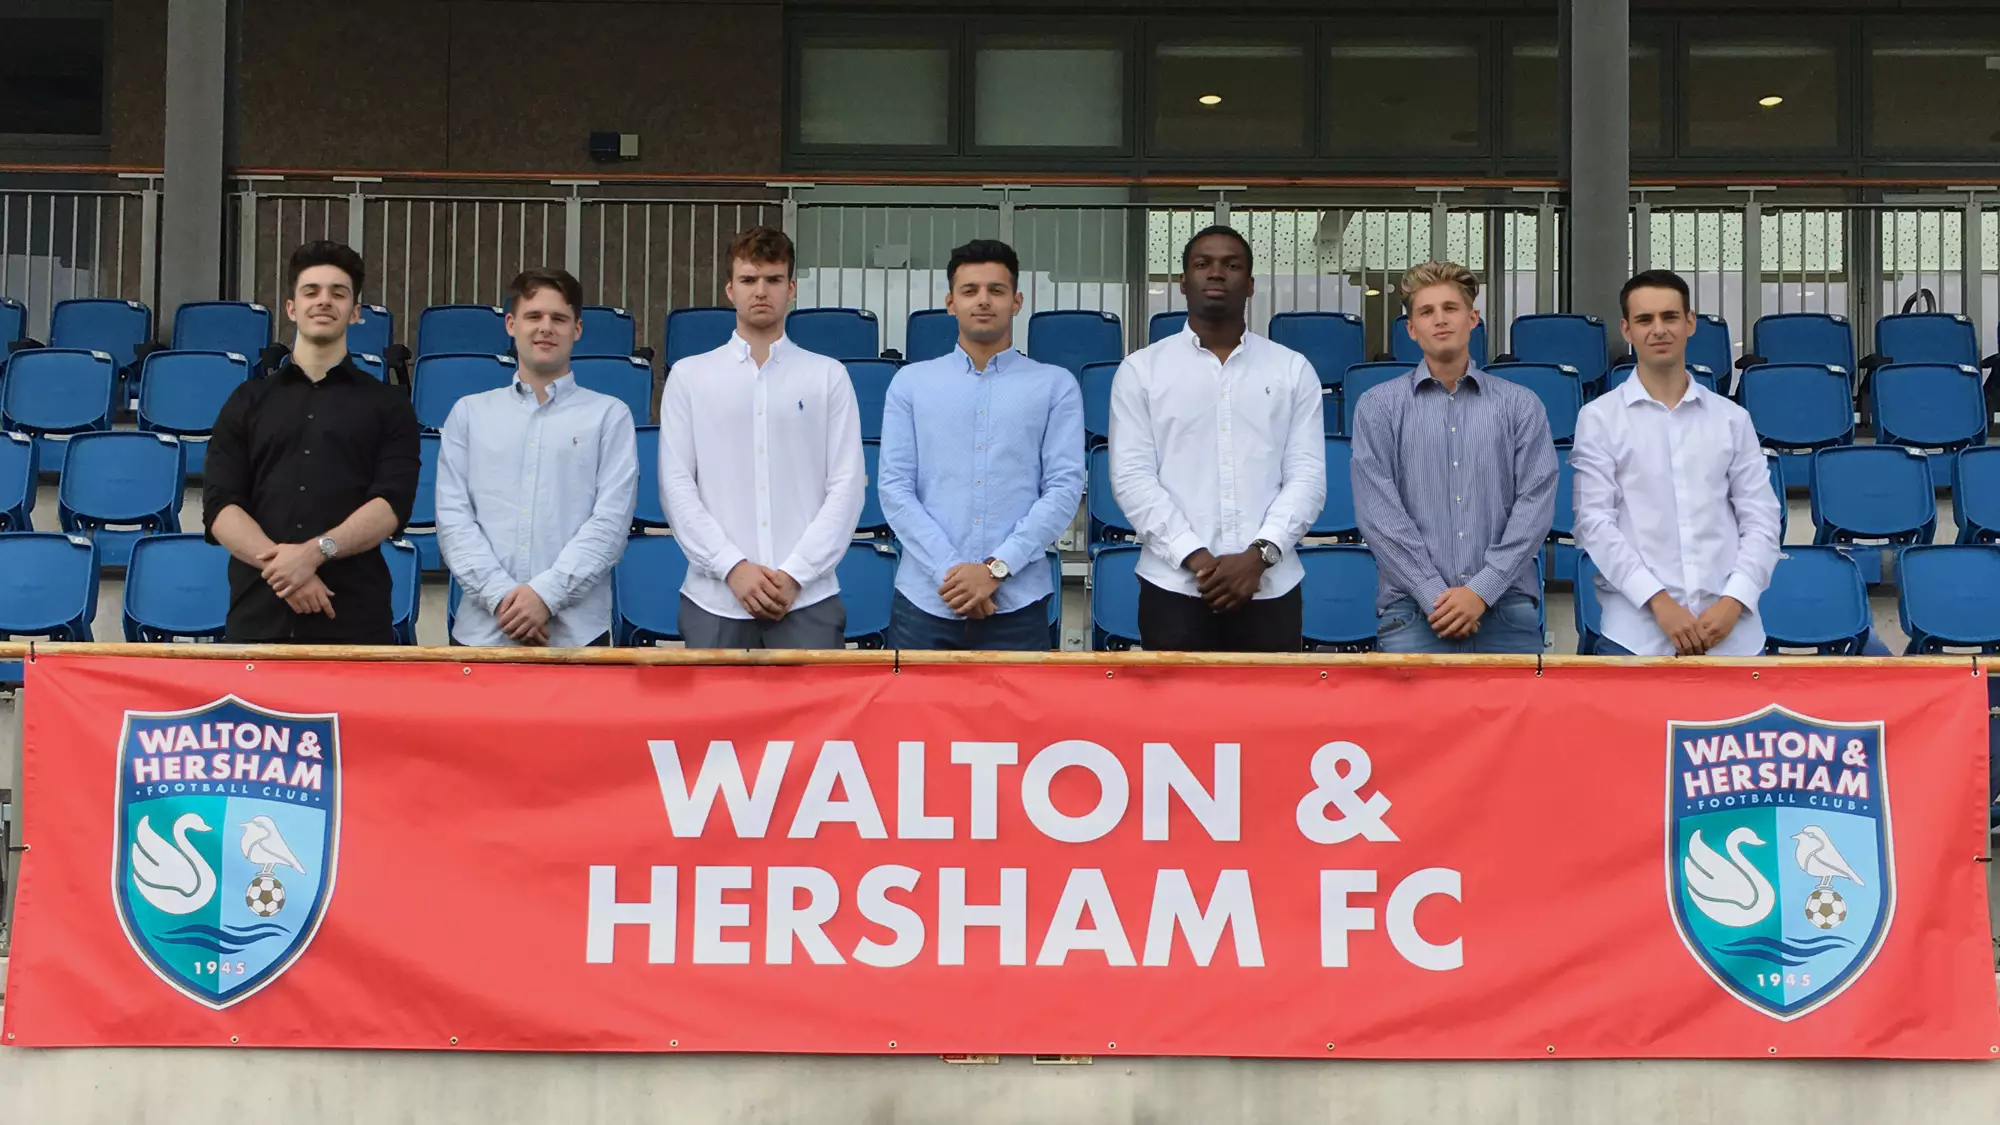 Seven 19-Year-Olds Become The Youngest Football Club Owners